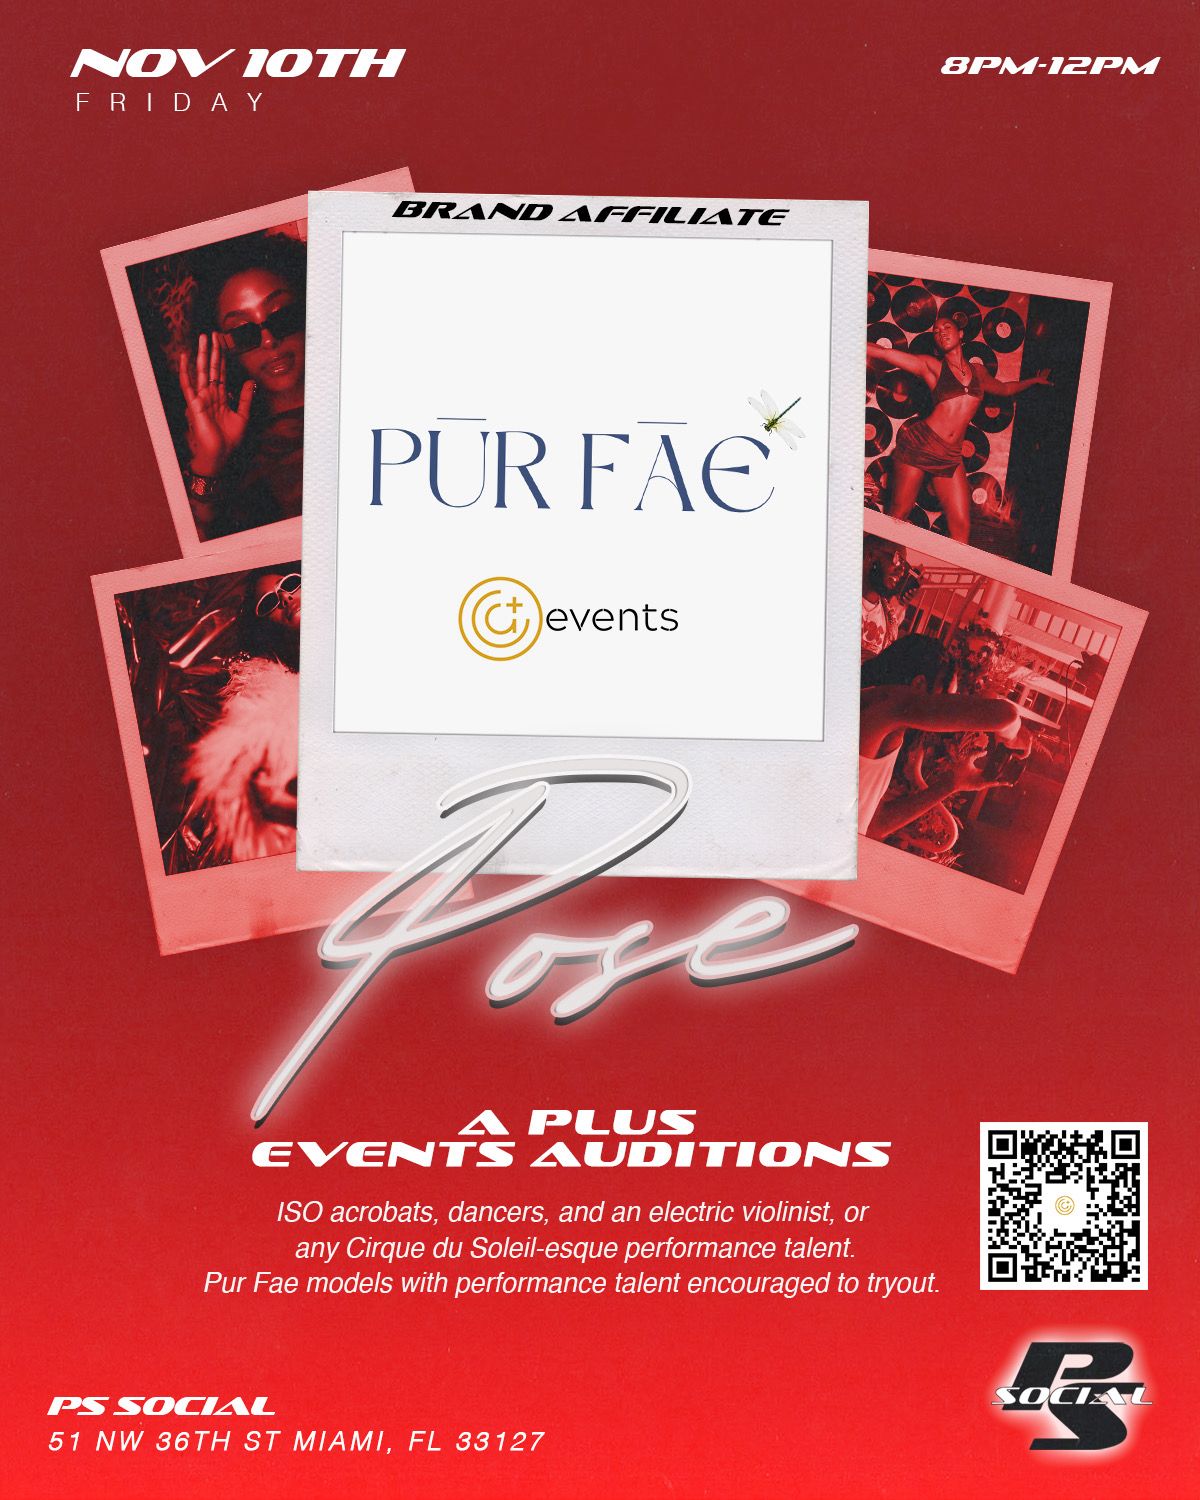 Event flyer for PS Social venue for A Plus Events talent auditions on Friday, Nov. 10th. The flyer is red in color advertising POSE content party co-hosted by A Plus Events who are conducting talent auditons